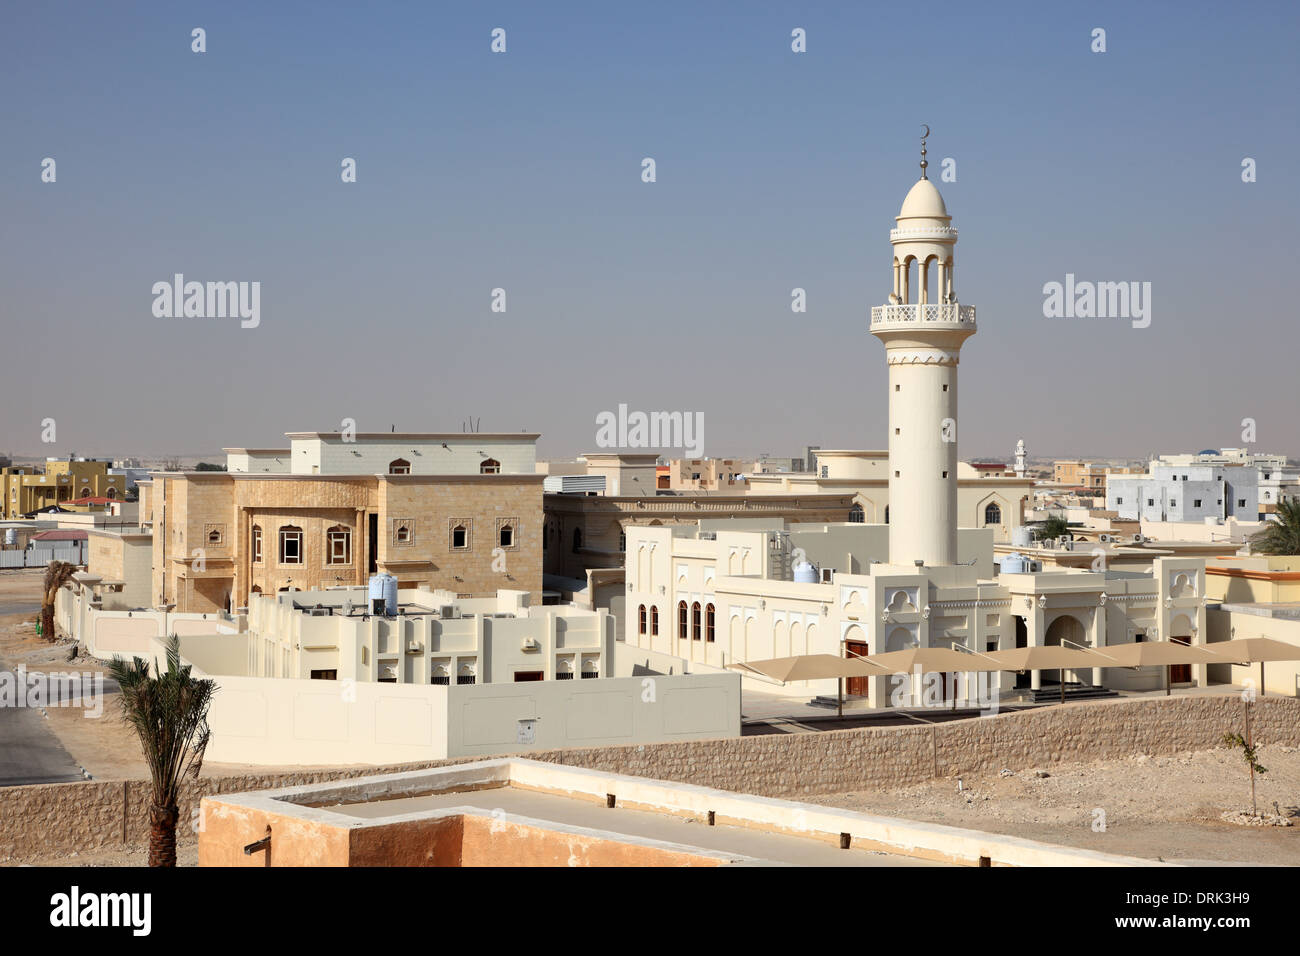 Mosque in residential area of Doha, Qatar, Middle East Stock Photo